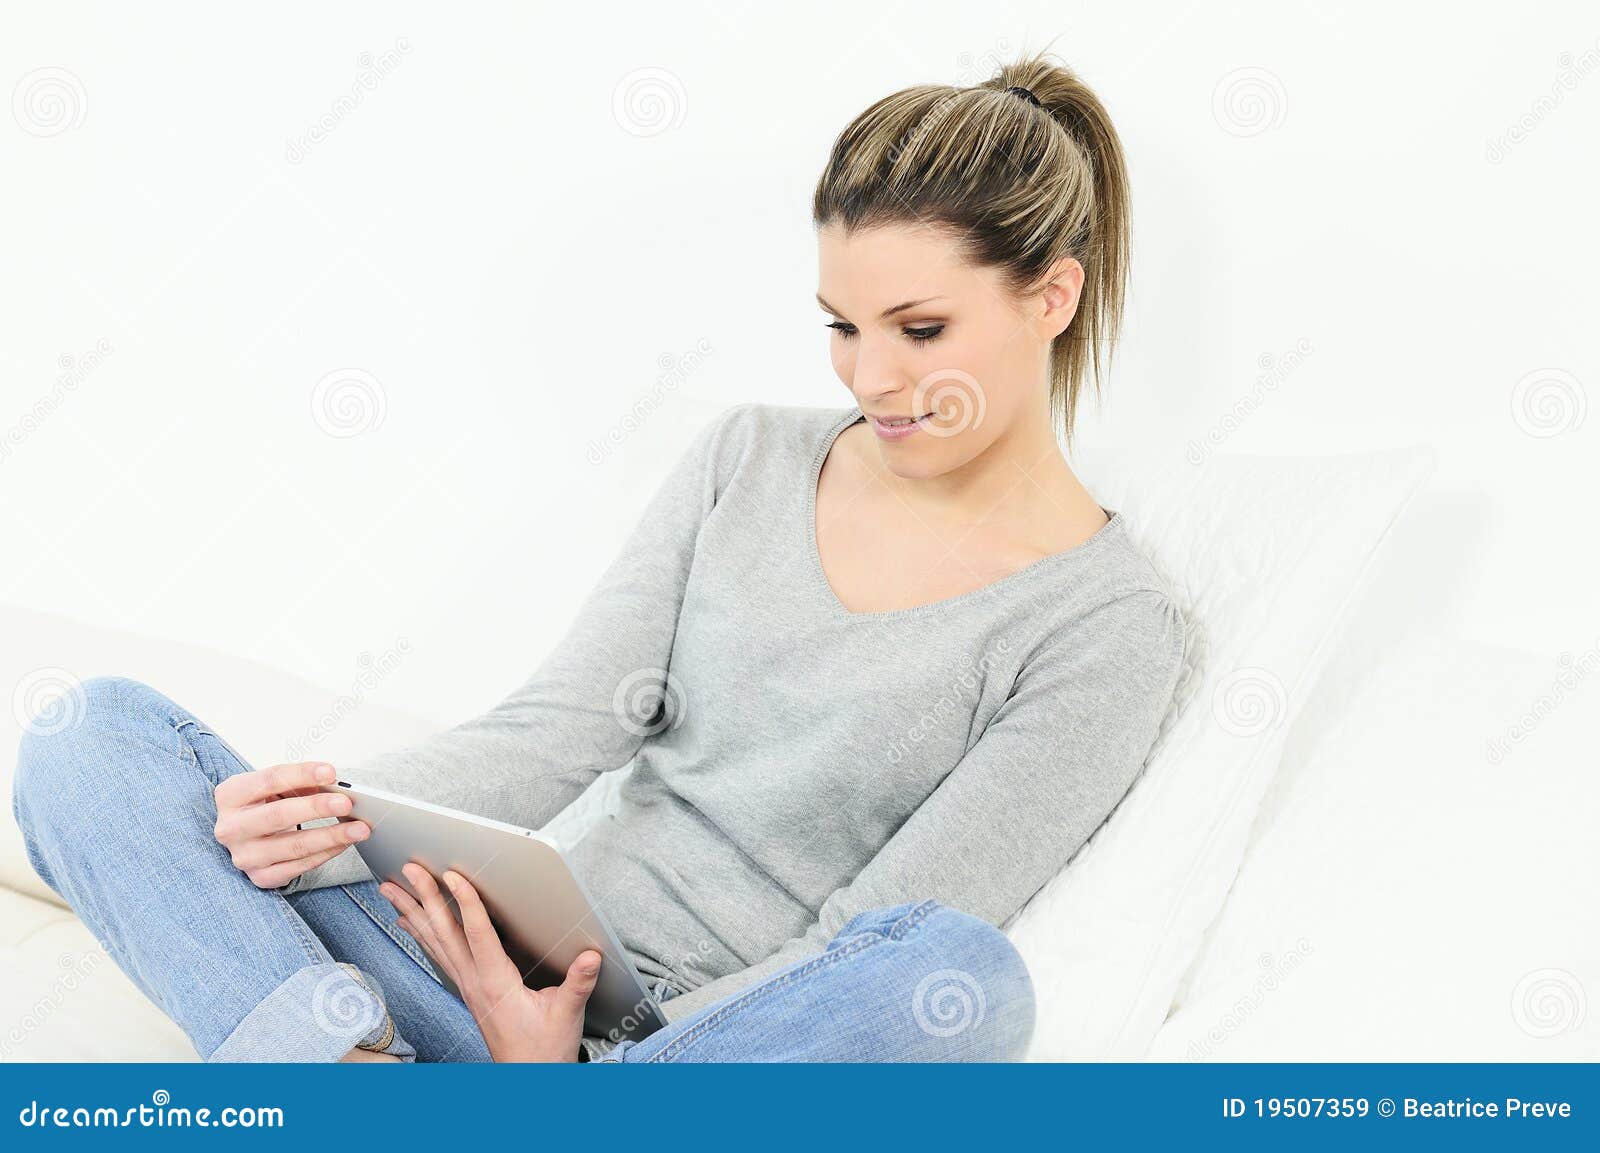 Digital woman stock image. Image of relaxing, leisure - 19507359